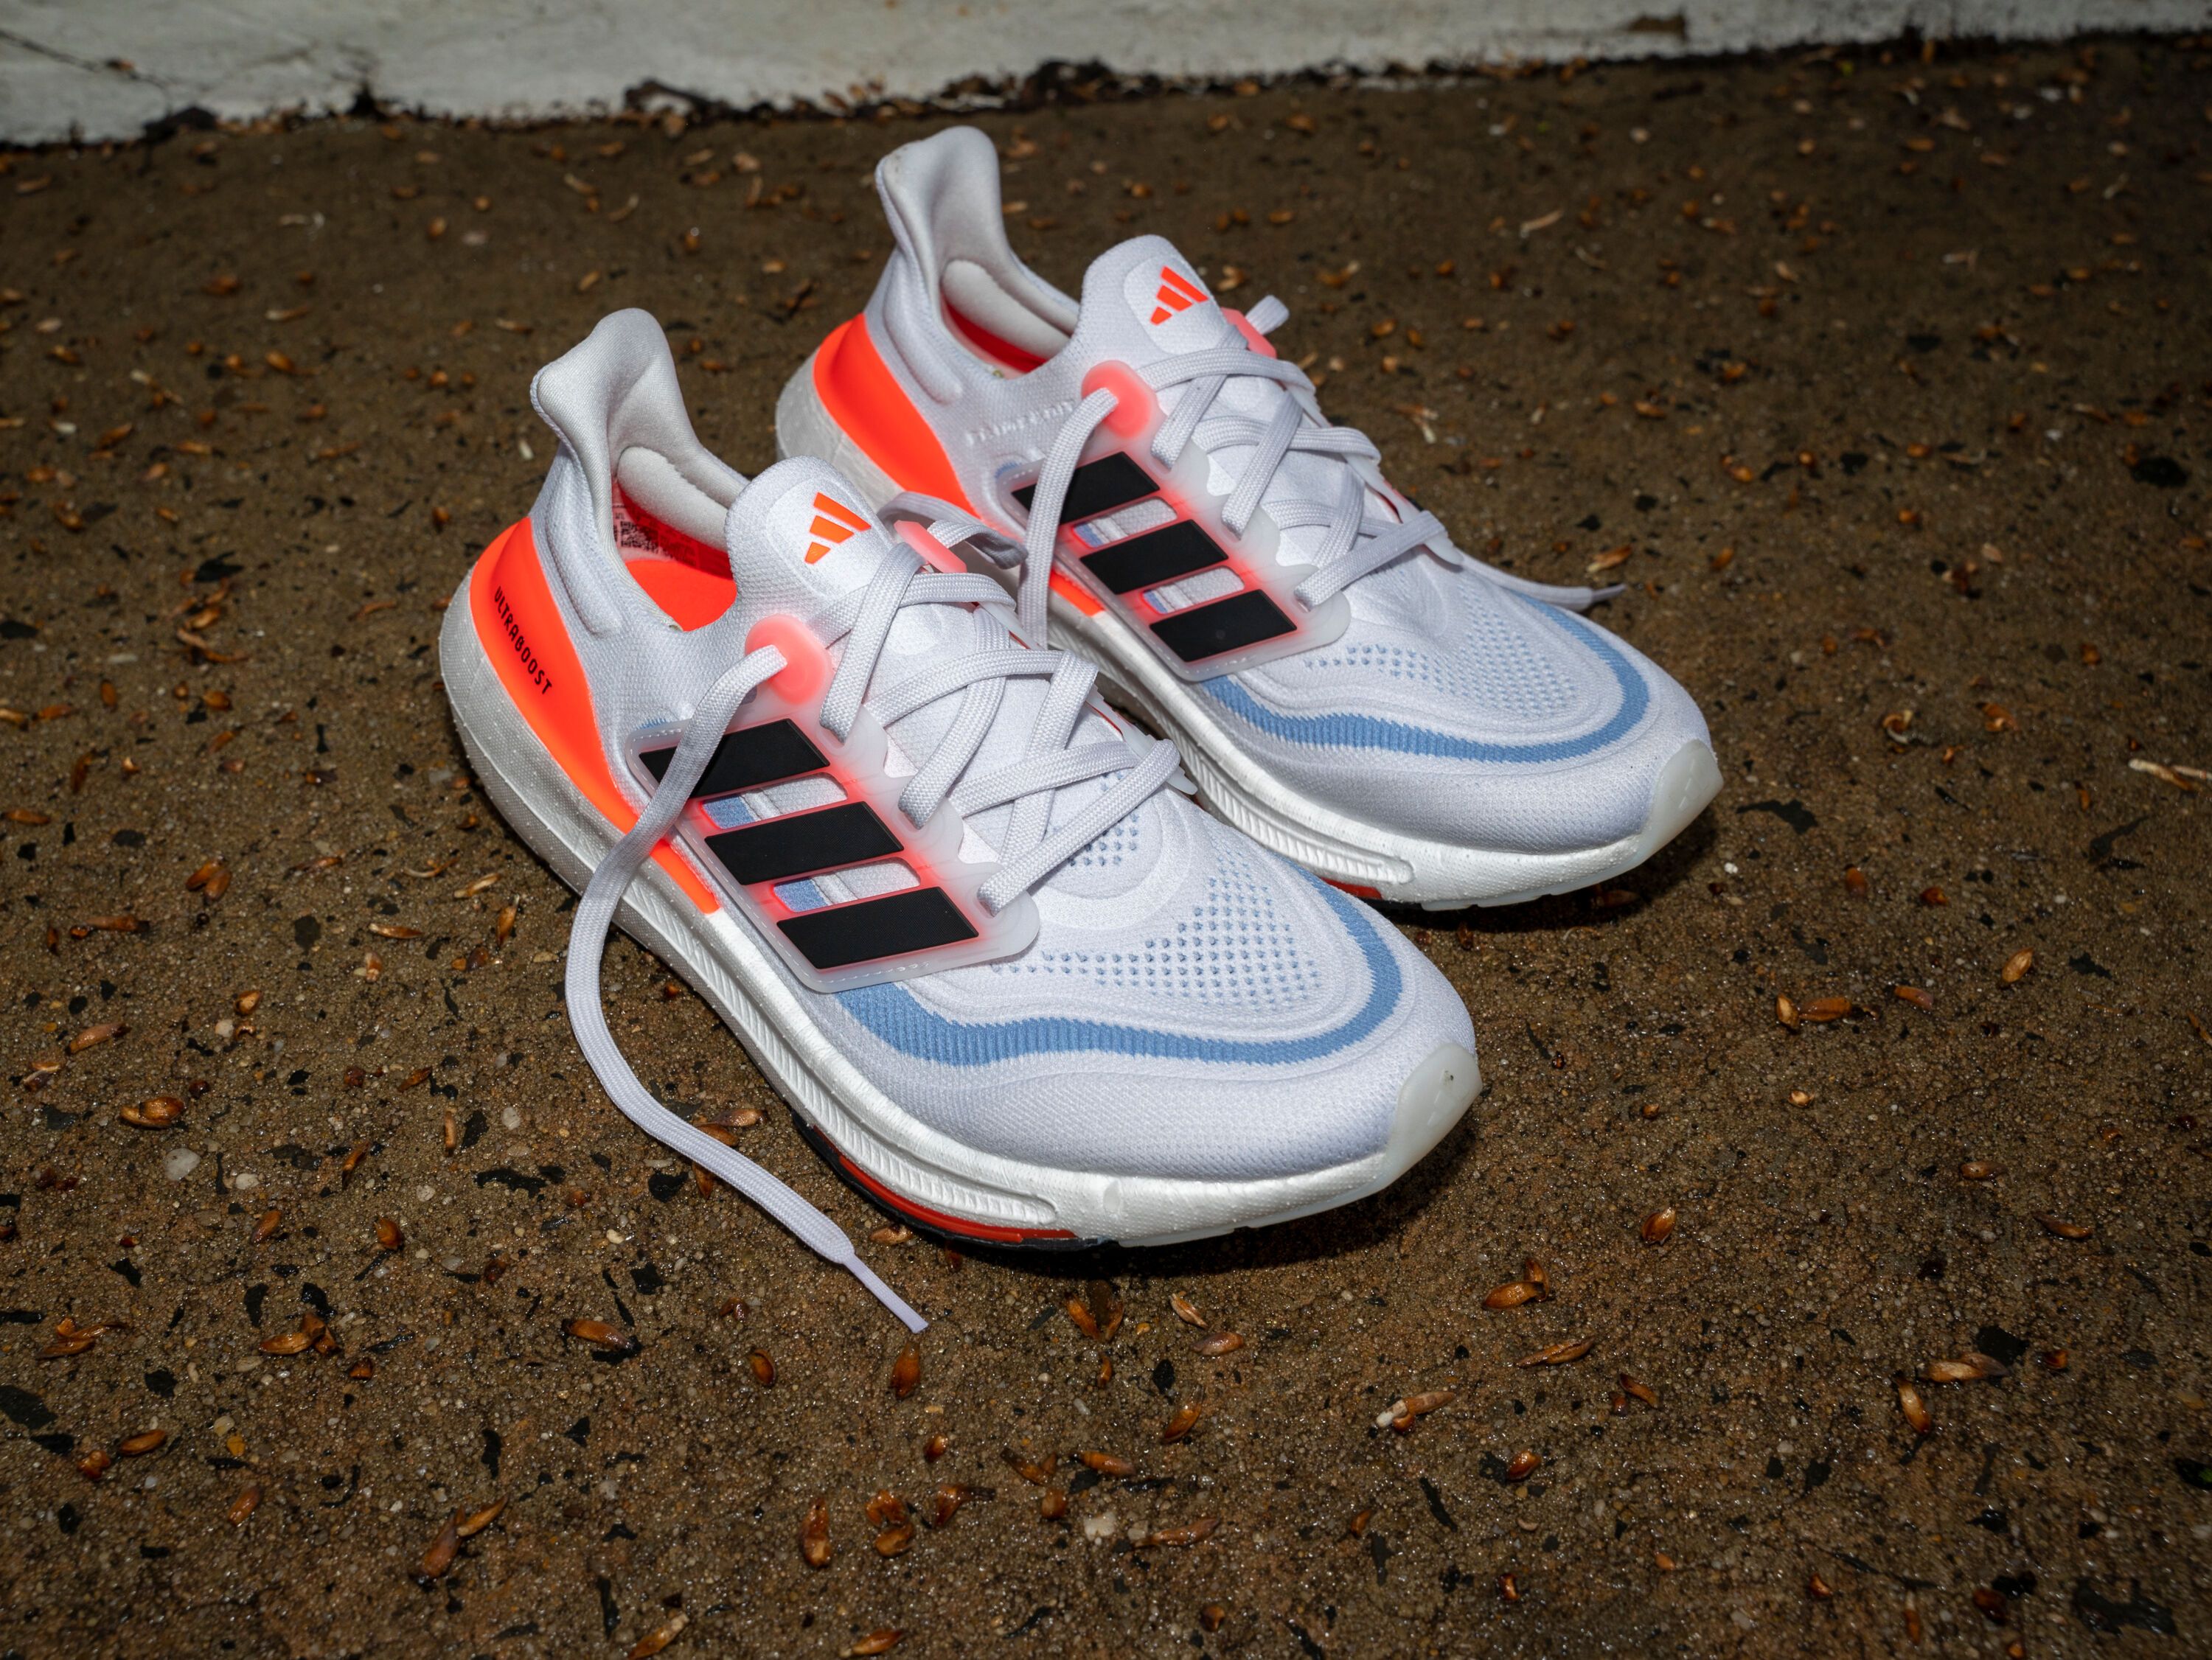 Adidas Ultraboost Light23 Preview Maxwidth 3000 Maxheight 3000 Ppi 300 Quality 80 63fe5aa5375f8 